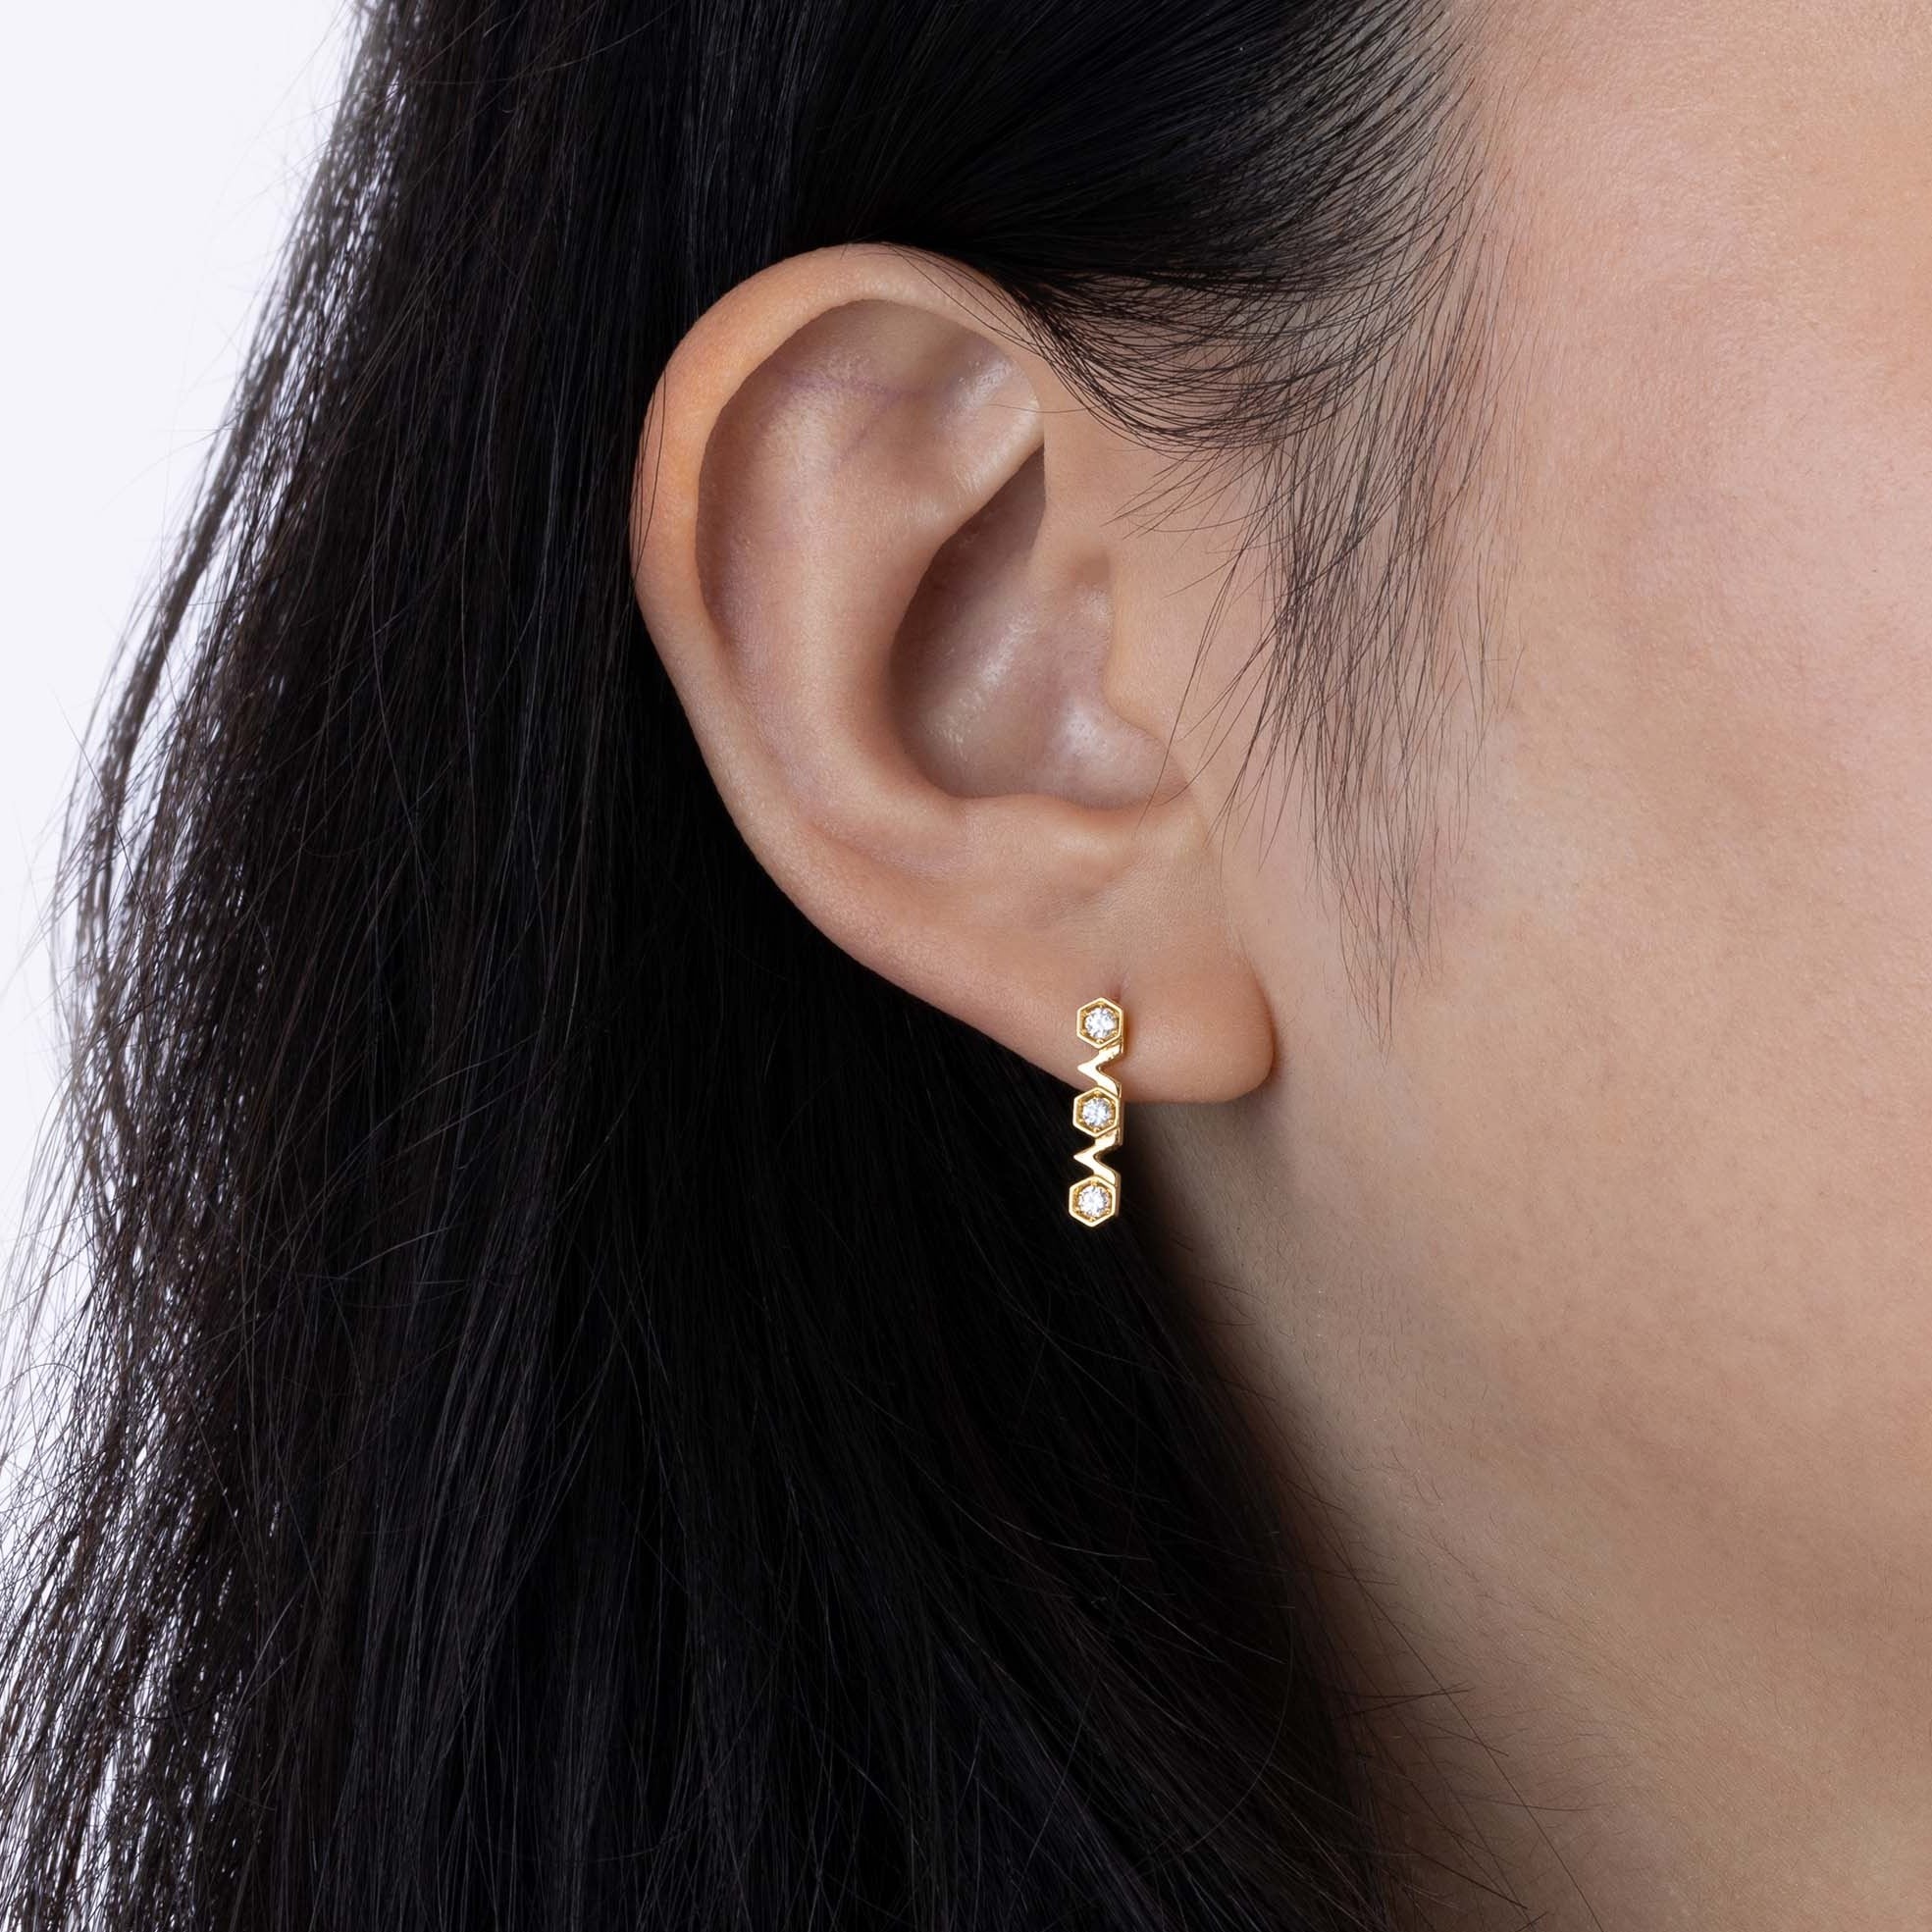 Yellow Gold Earrings with octagons and V shapes, and Diamonds, Small - Model shot